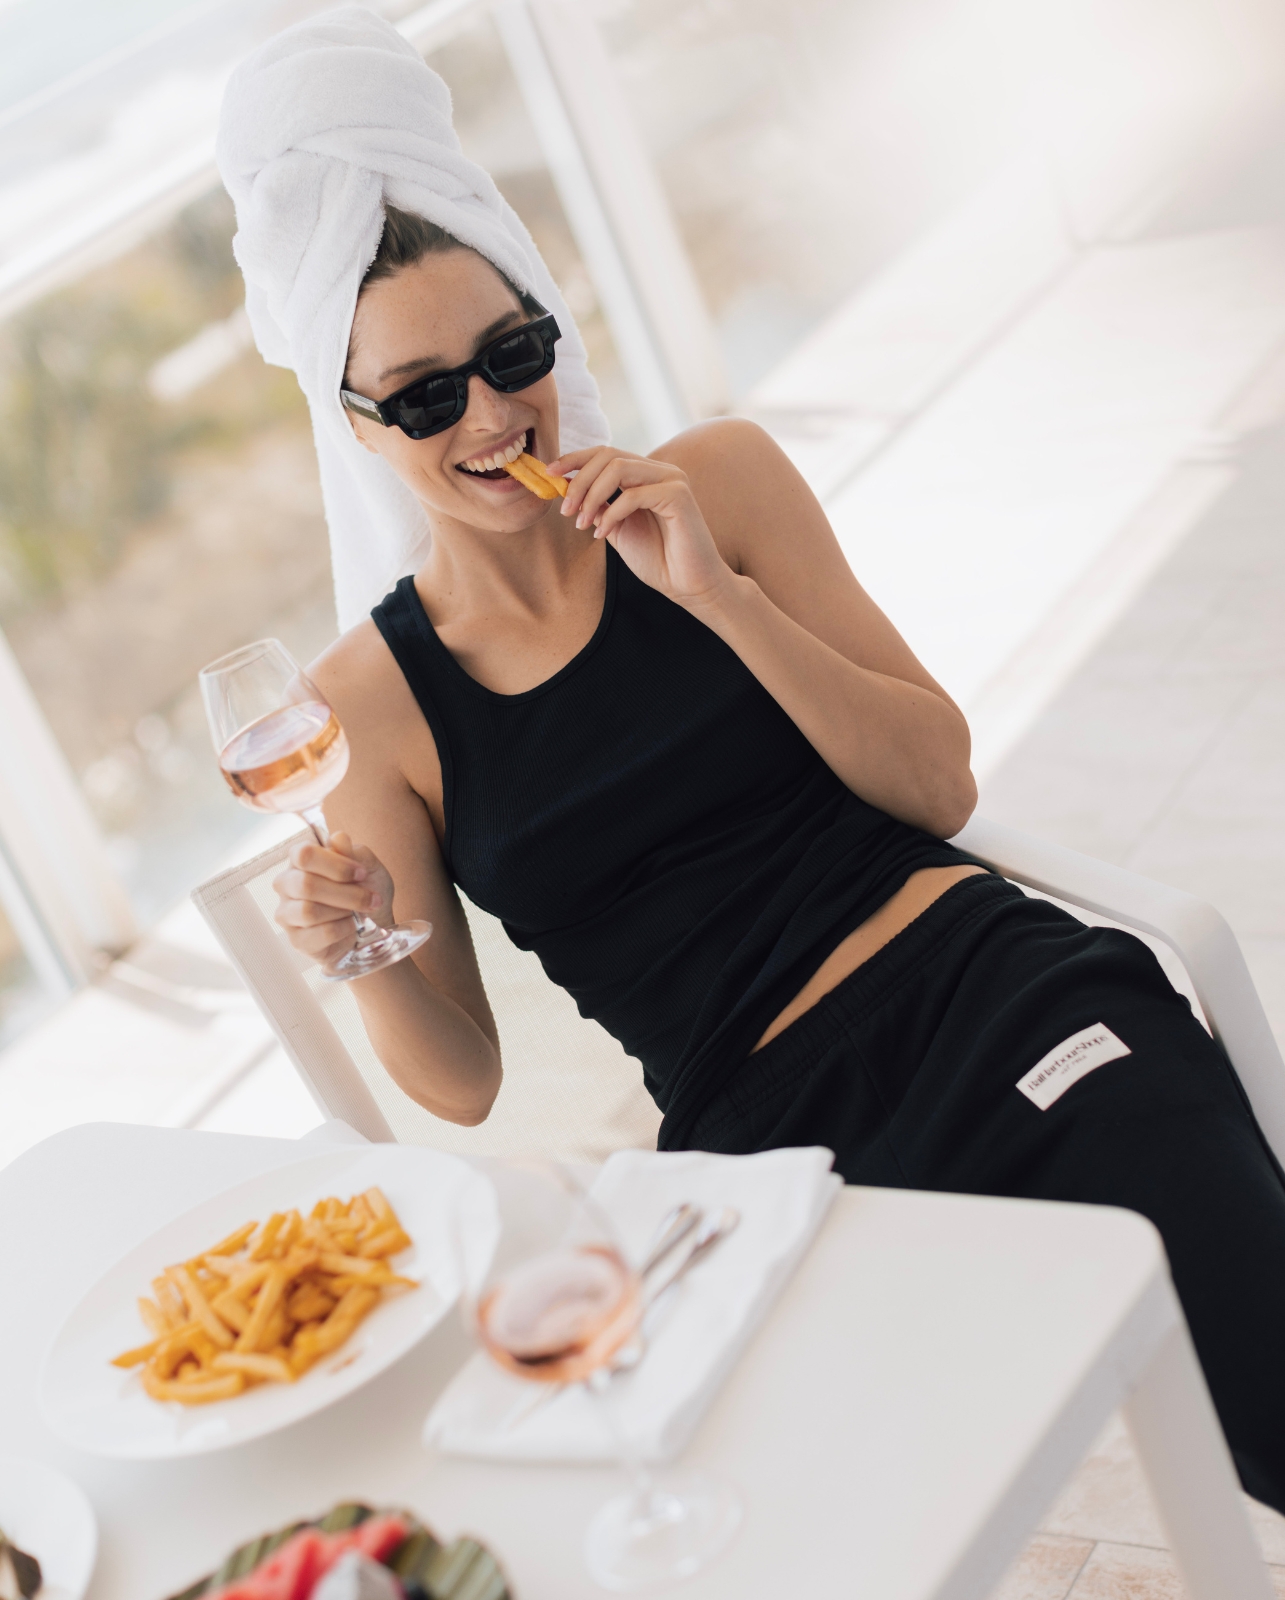 Lifestyle shot of female model styled in the black Bal Harbour Shops 1965 sweatpants, dining and sipping rose on a balcony over-looking the ocean